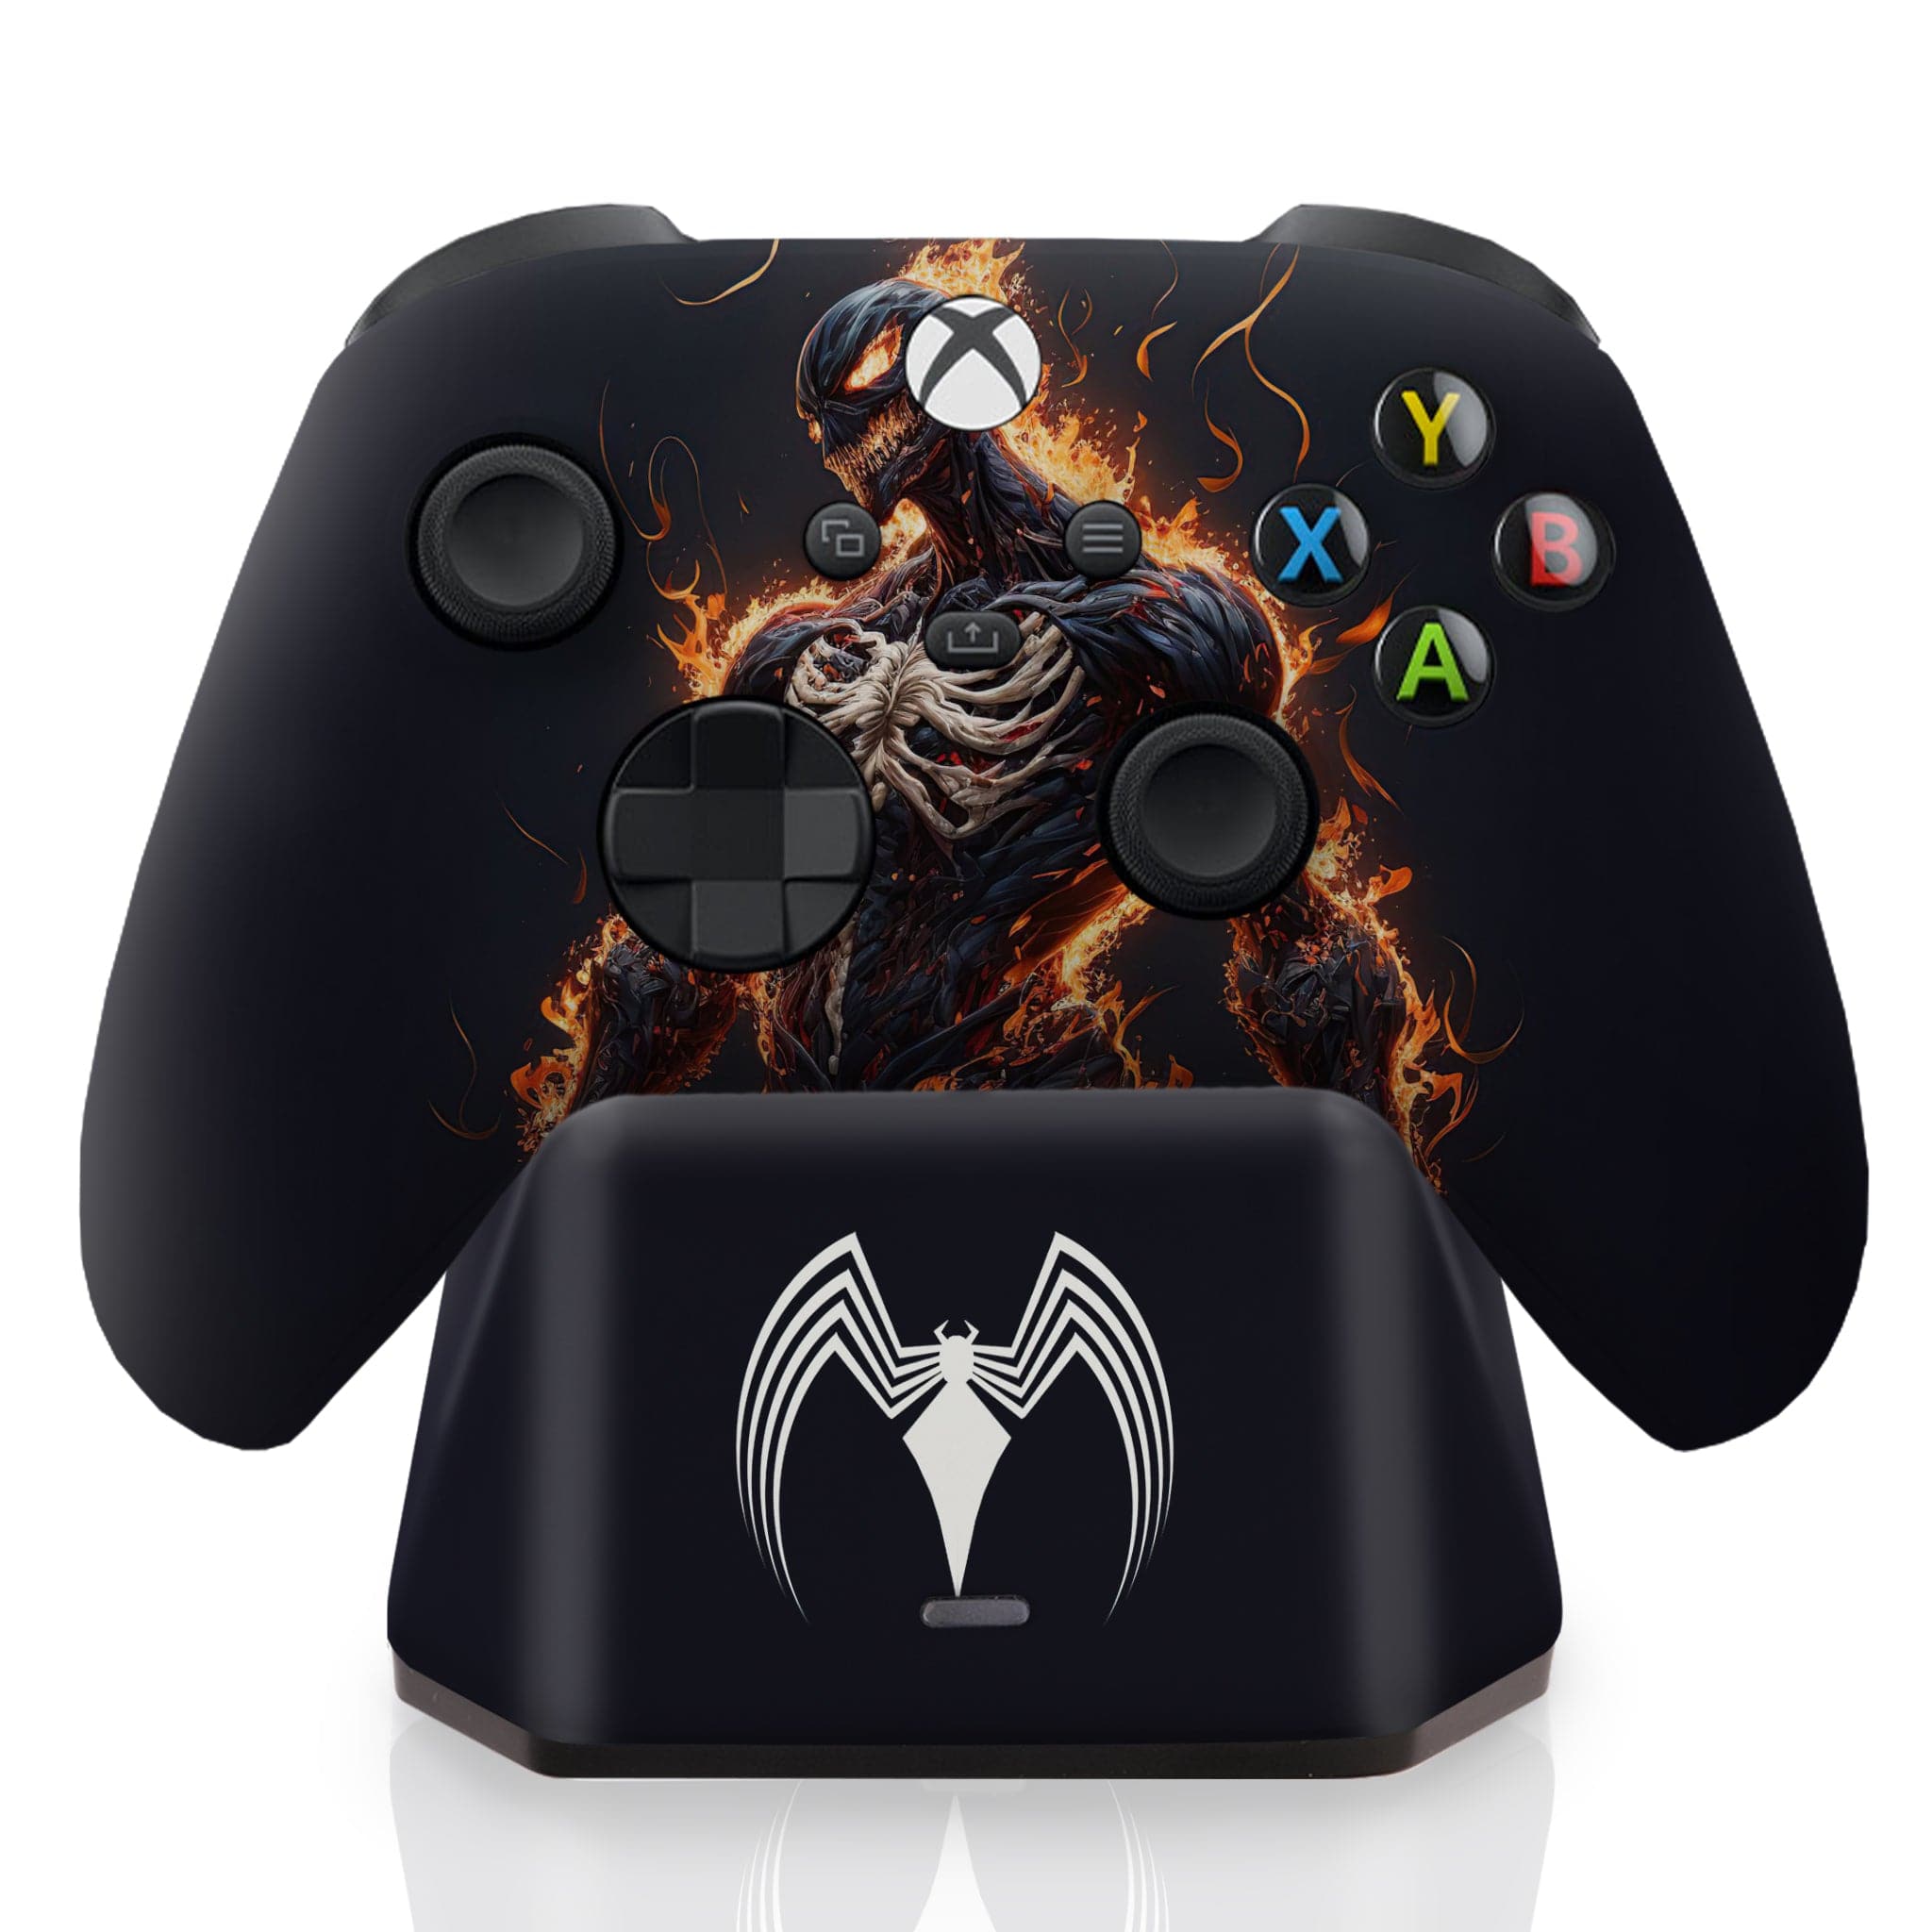 Venom Fire Xbox Series X Controller with Charging Station | Xbox X